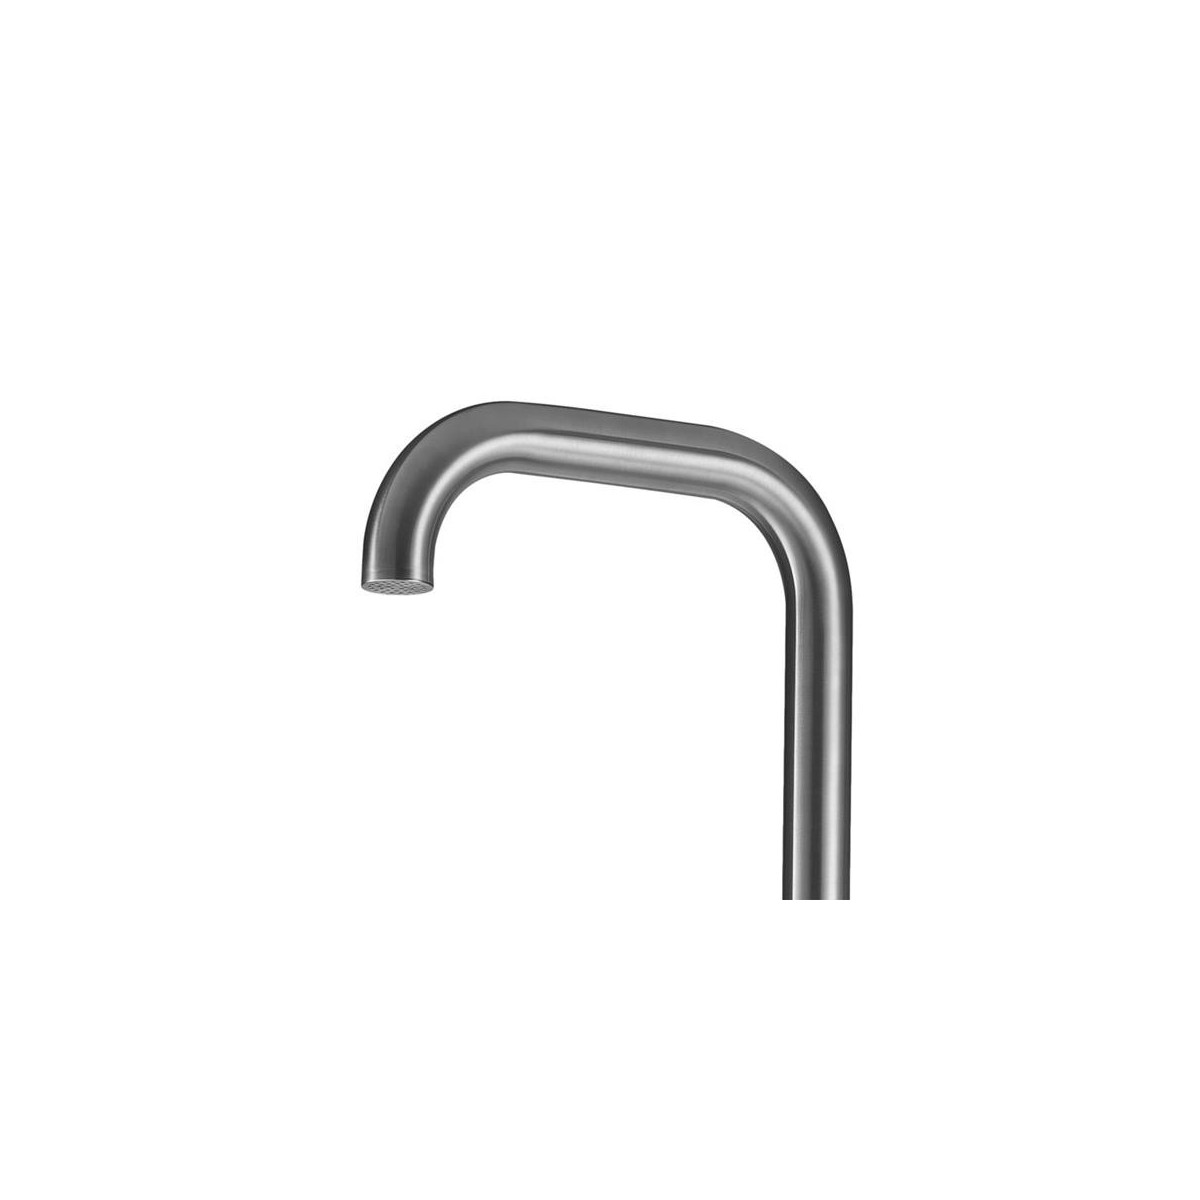 Buy Outdoor shower Chia in satin stainless AISI 316 with hand shower